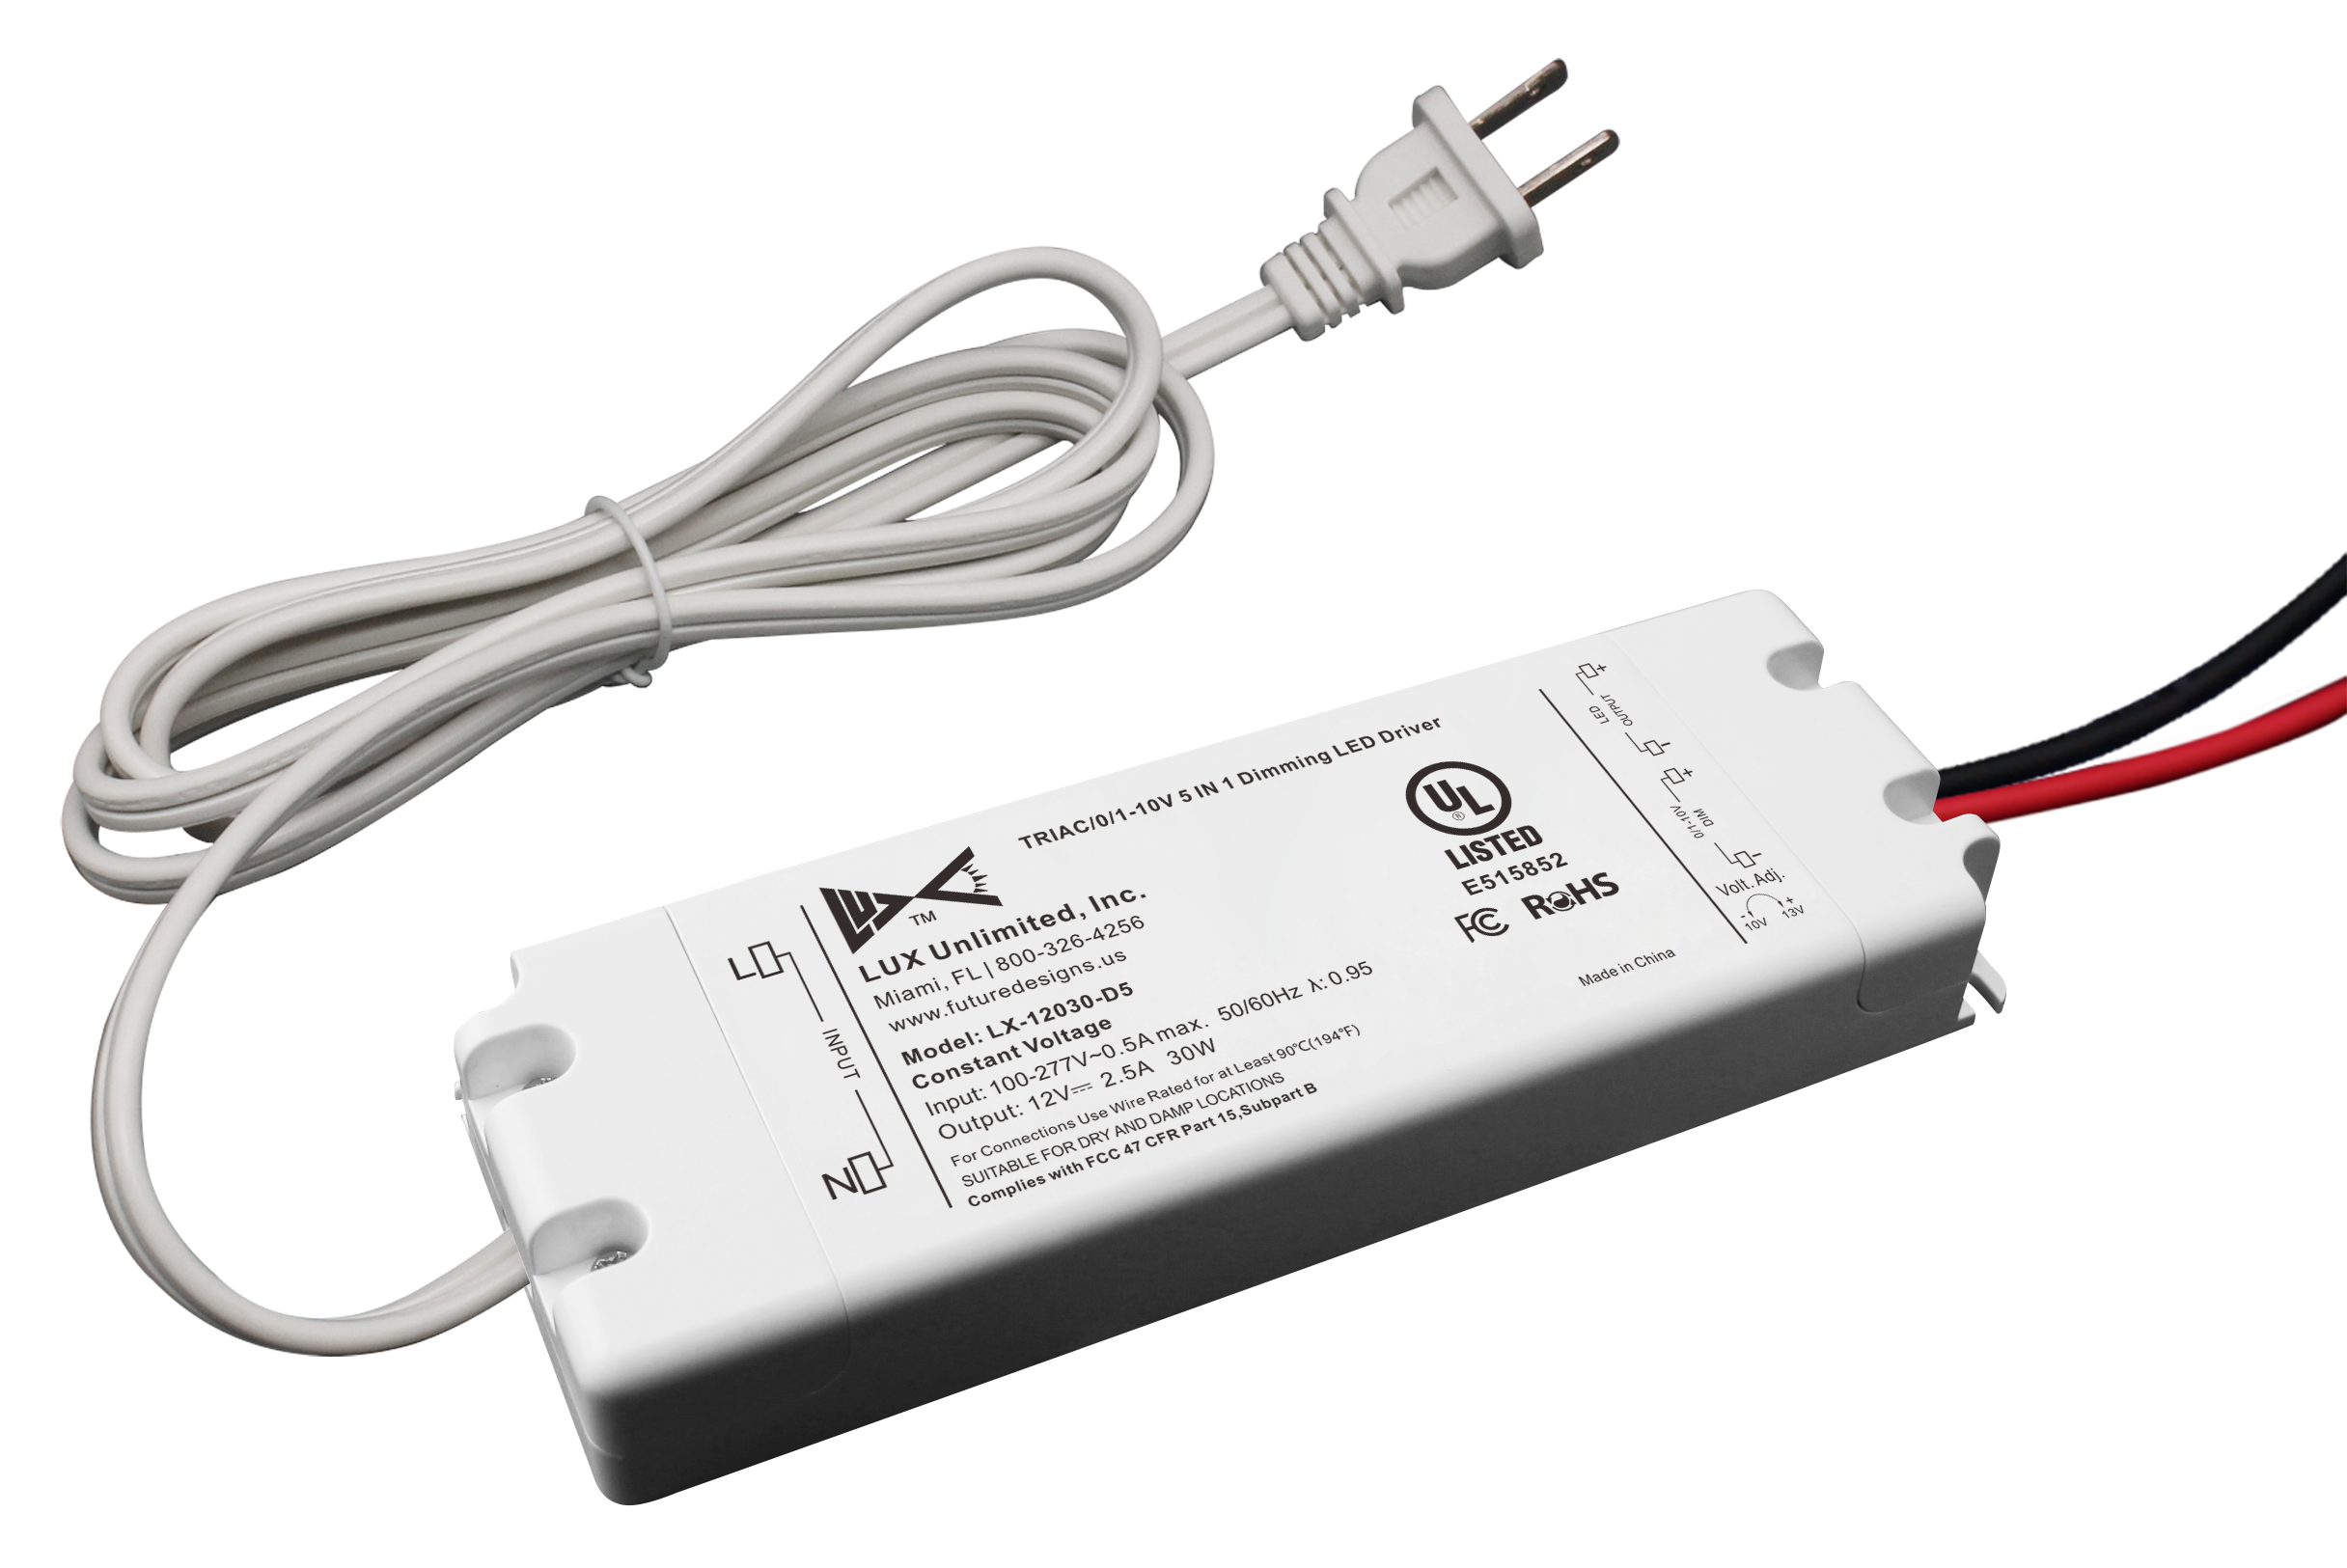 Constant Current LED Drivers Power led dimming function 5 x CV25